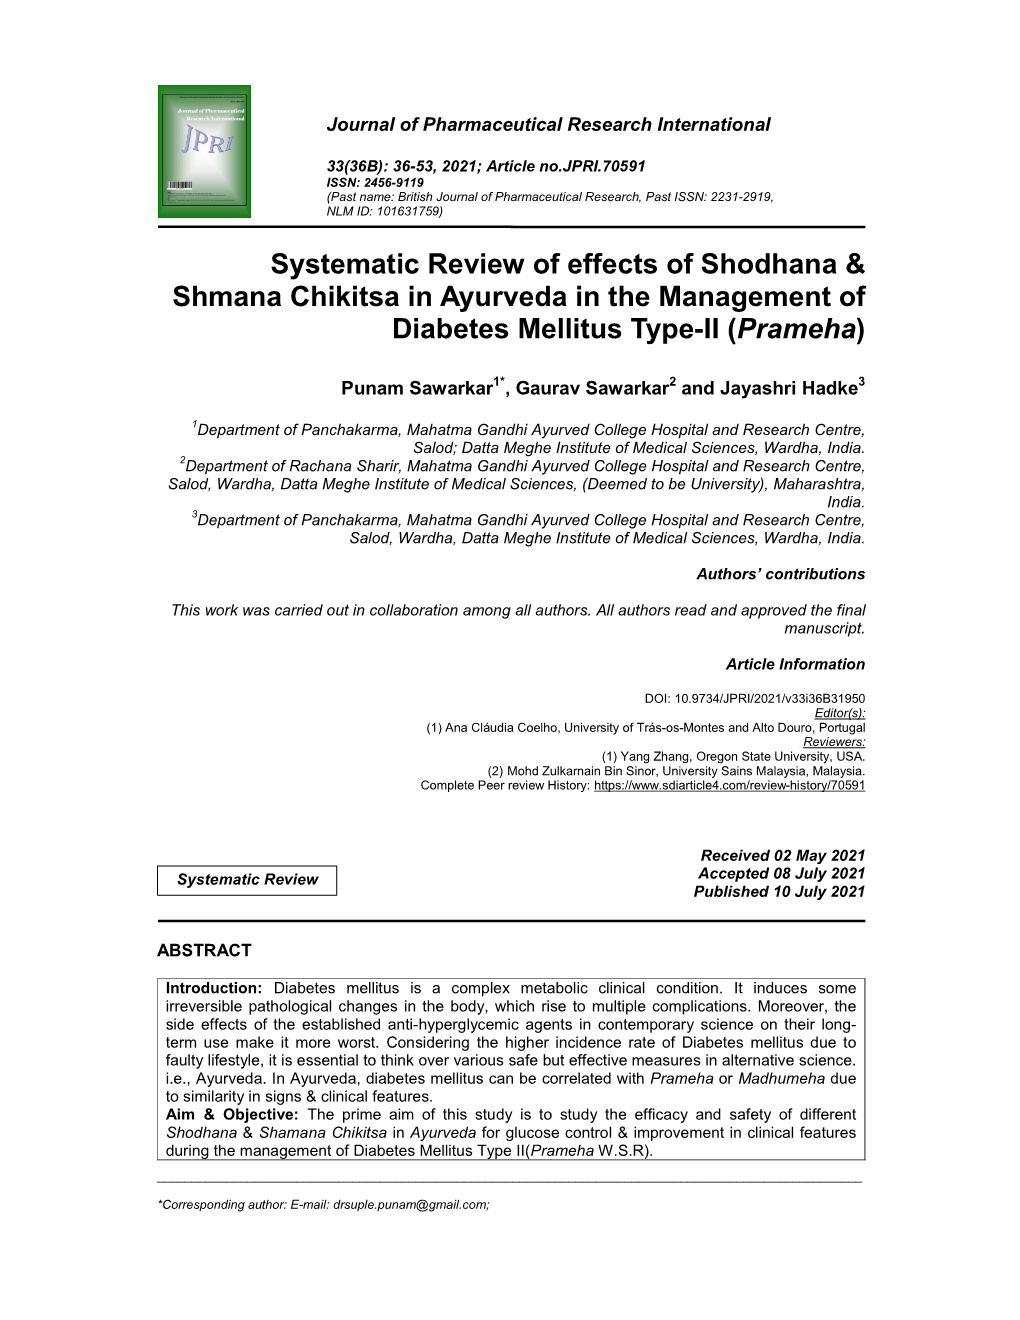 Systematic Review of Effects of Shodhana & Shmana Chikitsa In